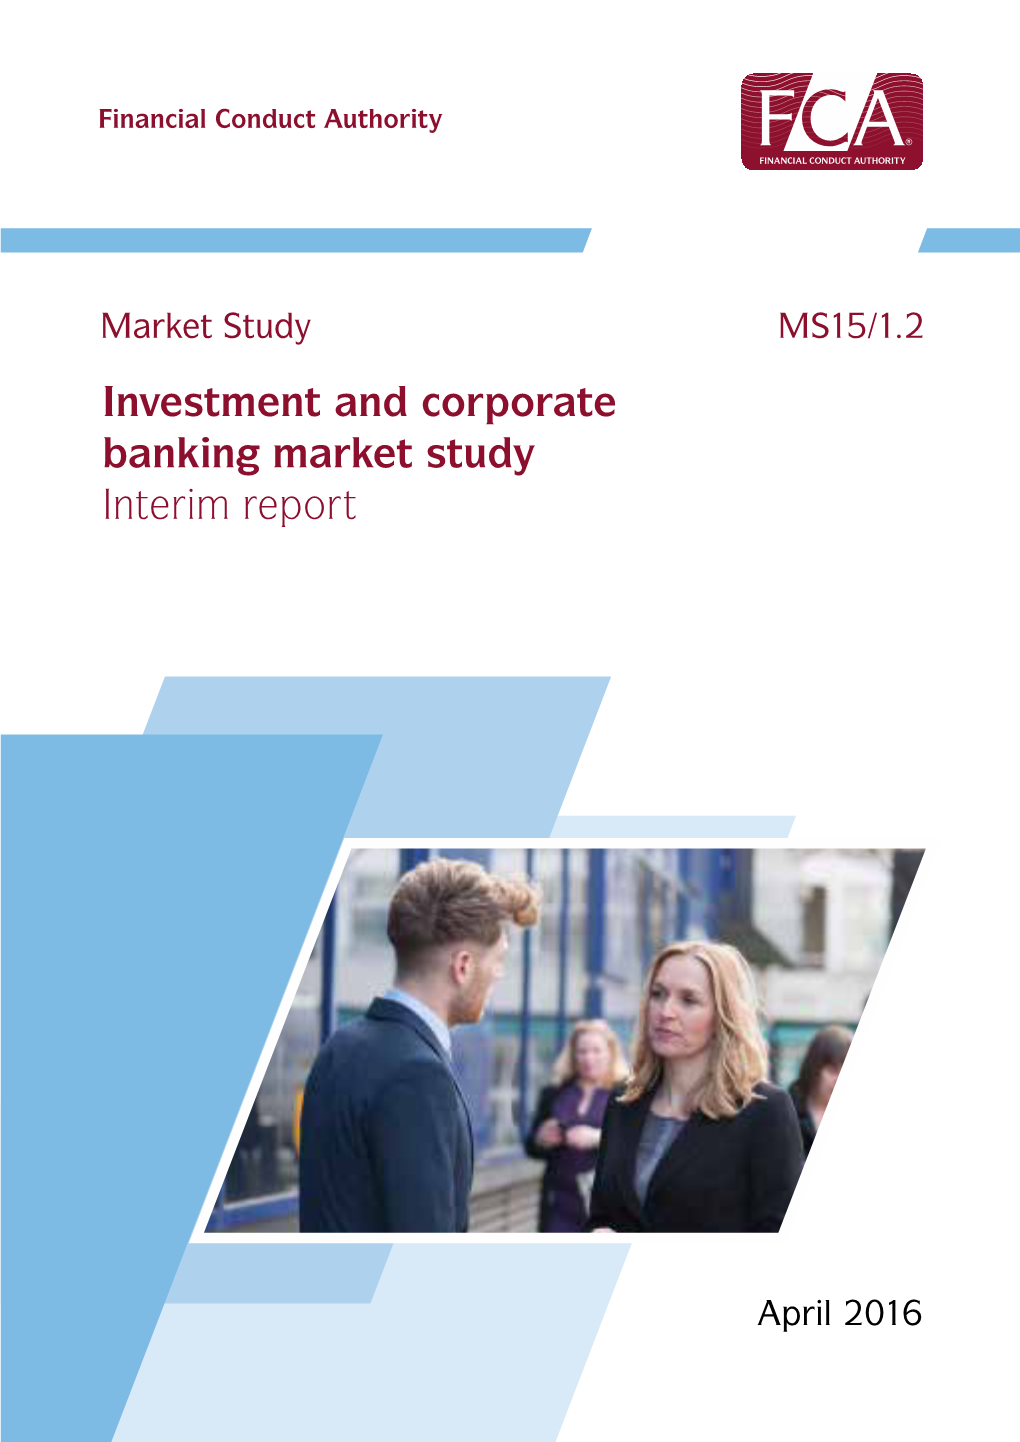 MS15/1.2 Investment and Corporate Banking Market Study: Interim Report